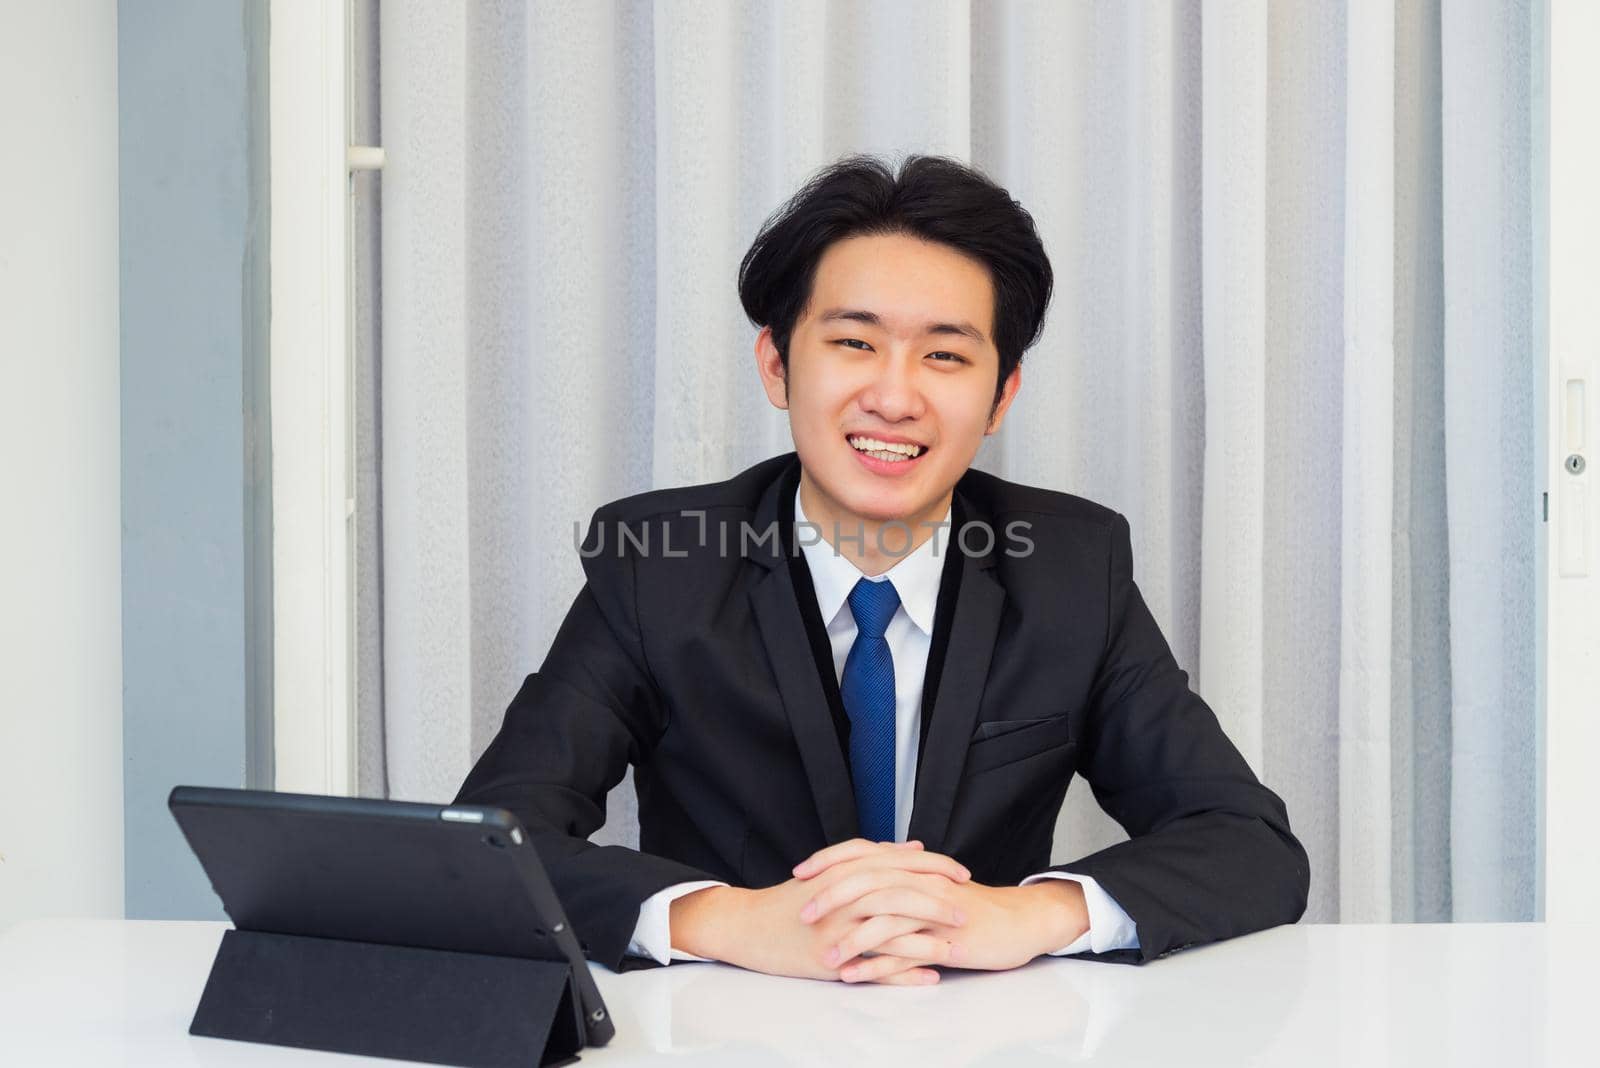 Work from home, Asian young businessman video conference call or facetime he smiling looking to camera sitting with hands on desk using smart digital tablet computer at home office